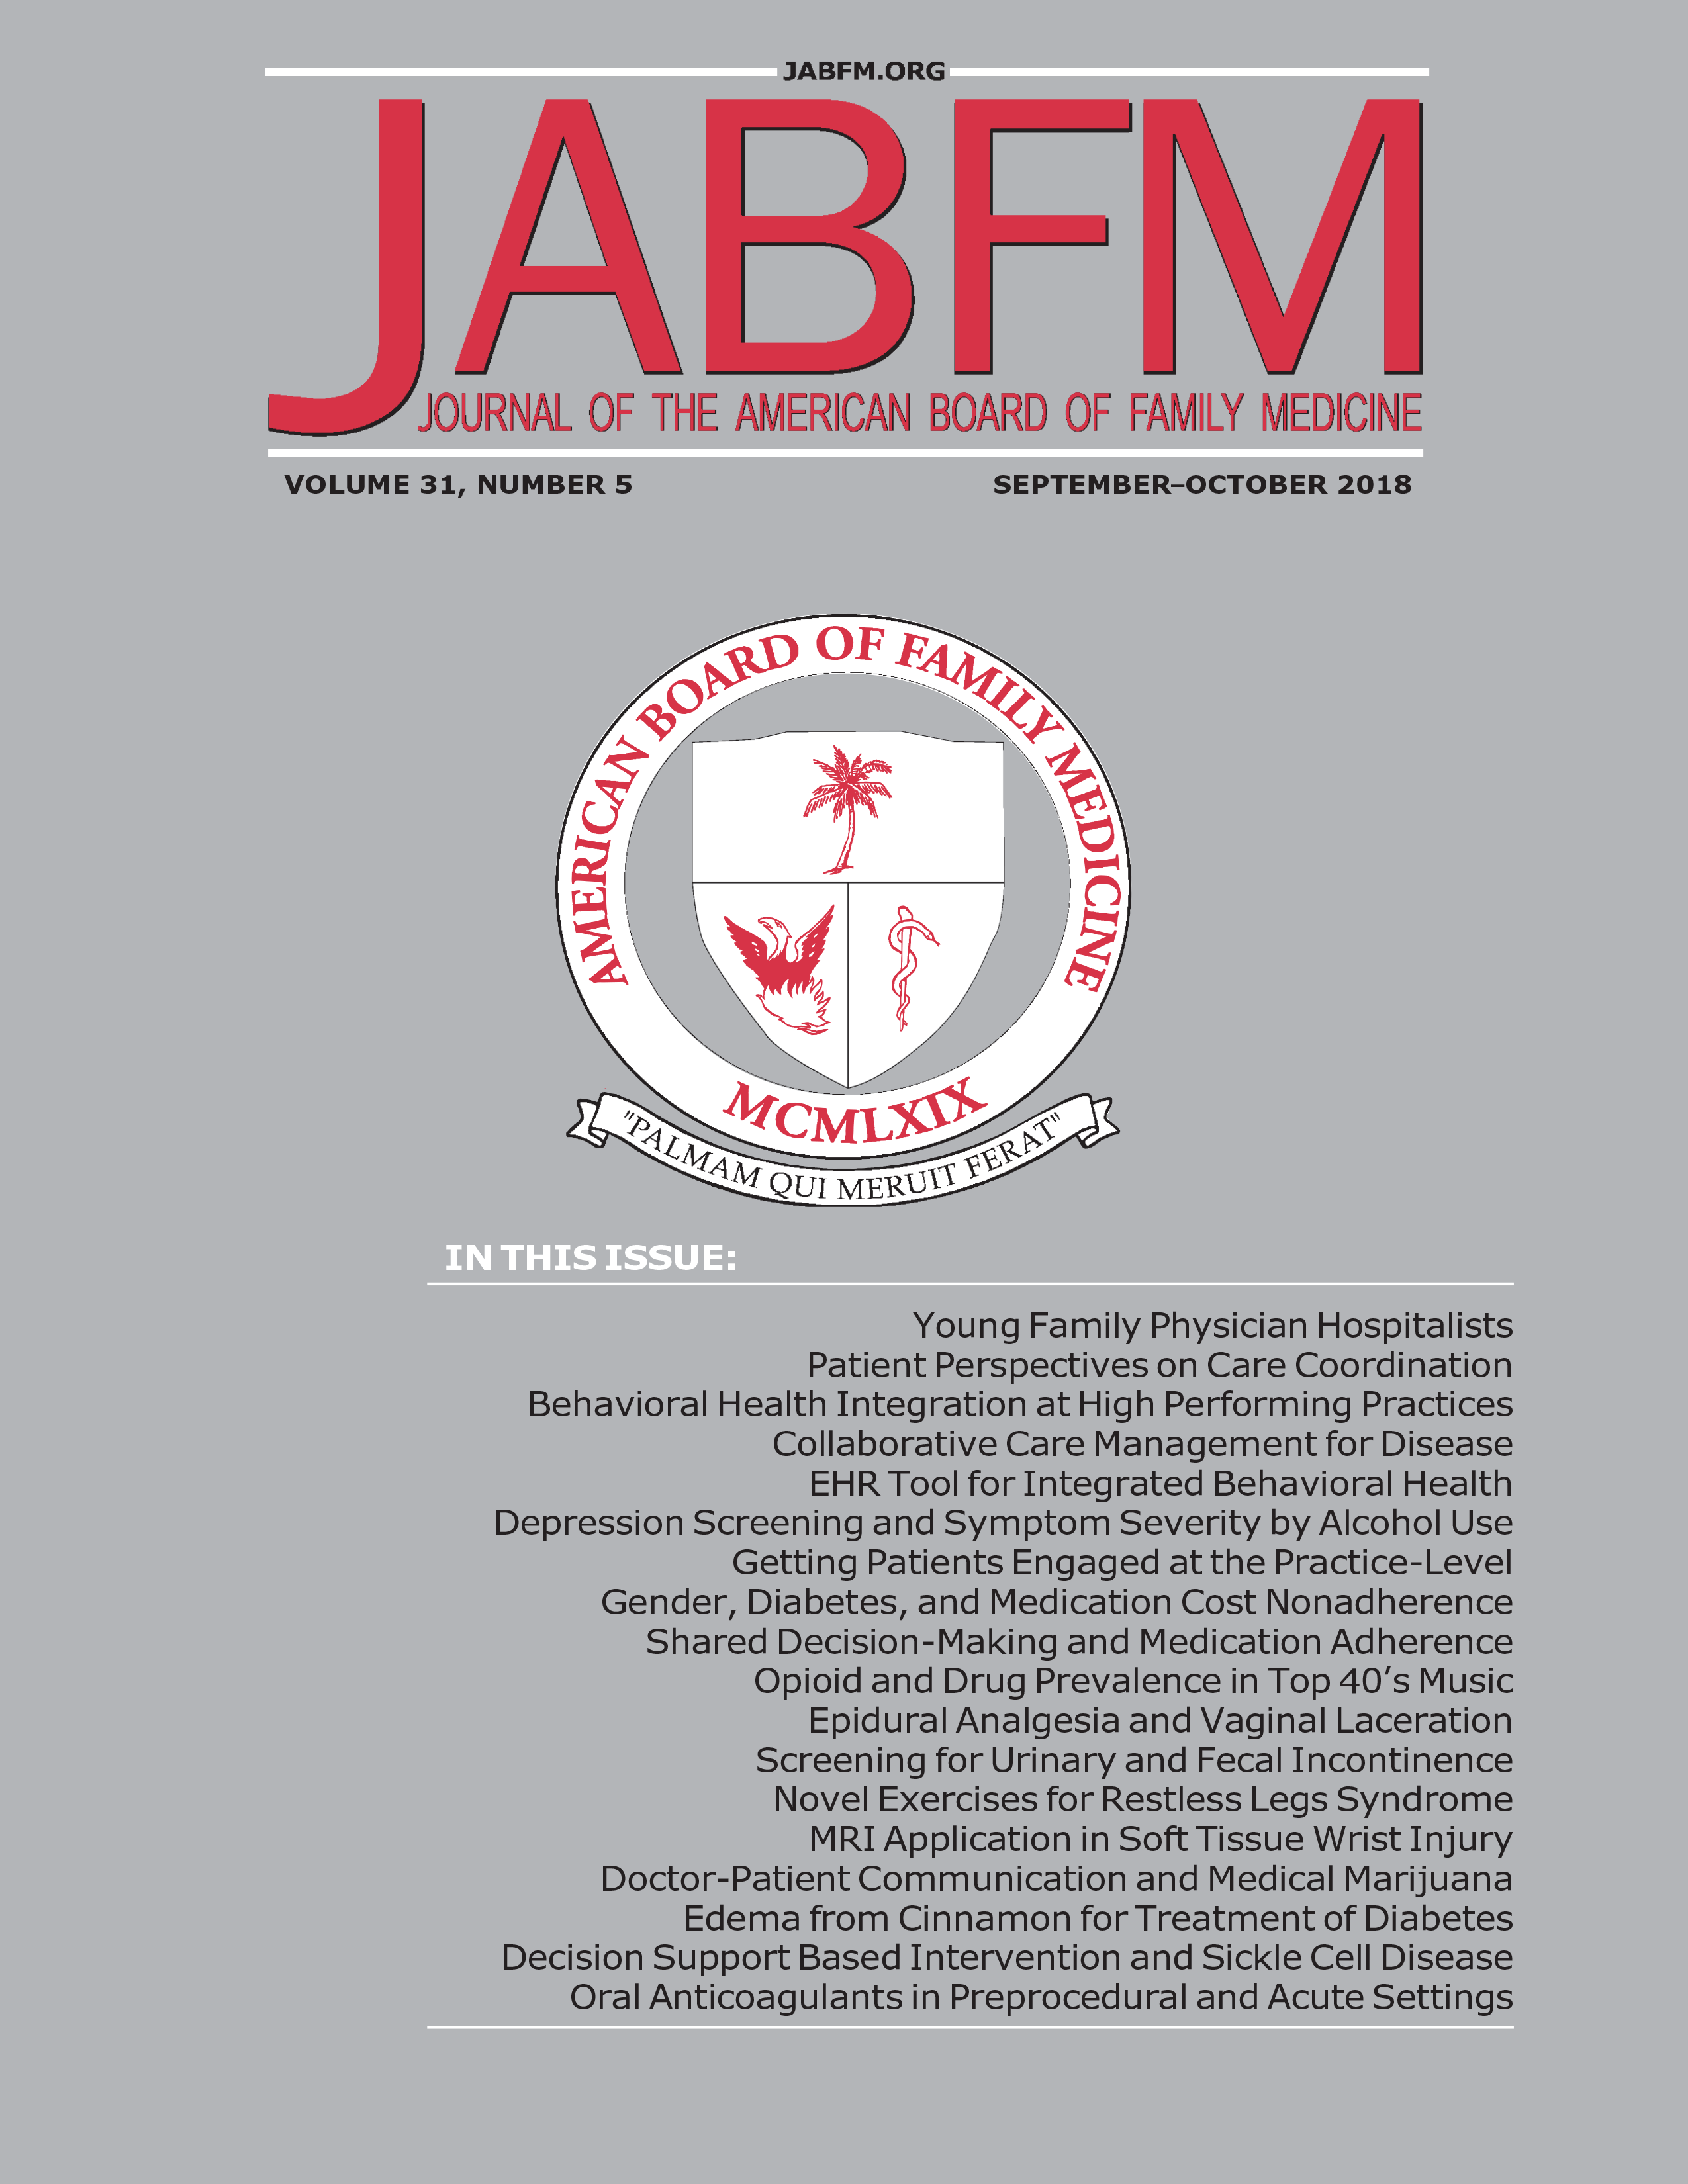 "They Go Hand in Hand": Perspectives on the Relationship Between the Core Values of Family Medicine and Abortion Provision Among Family Physicians Who Do Not Oppose Abortion